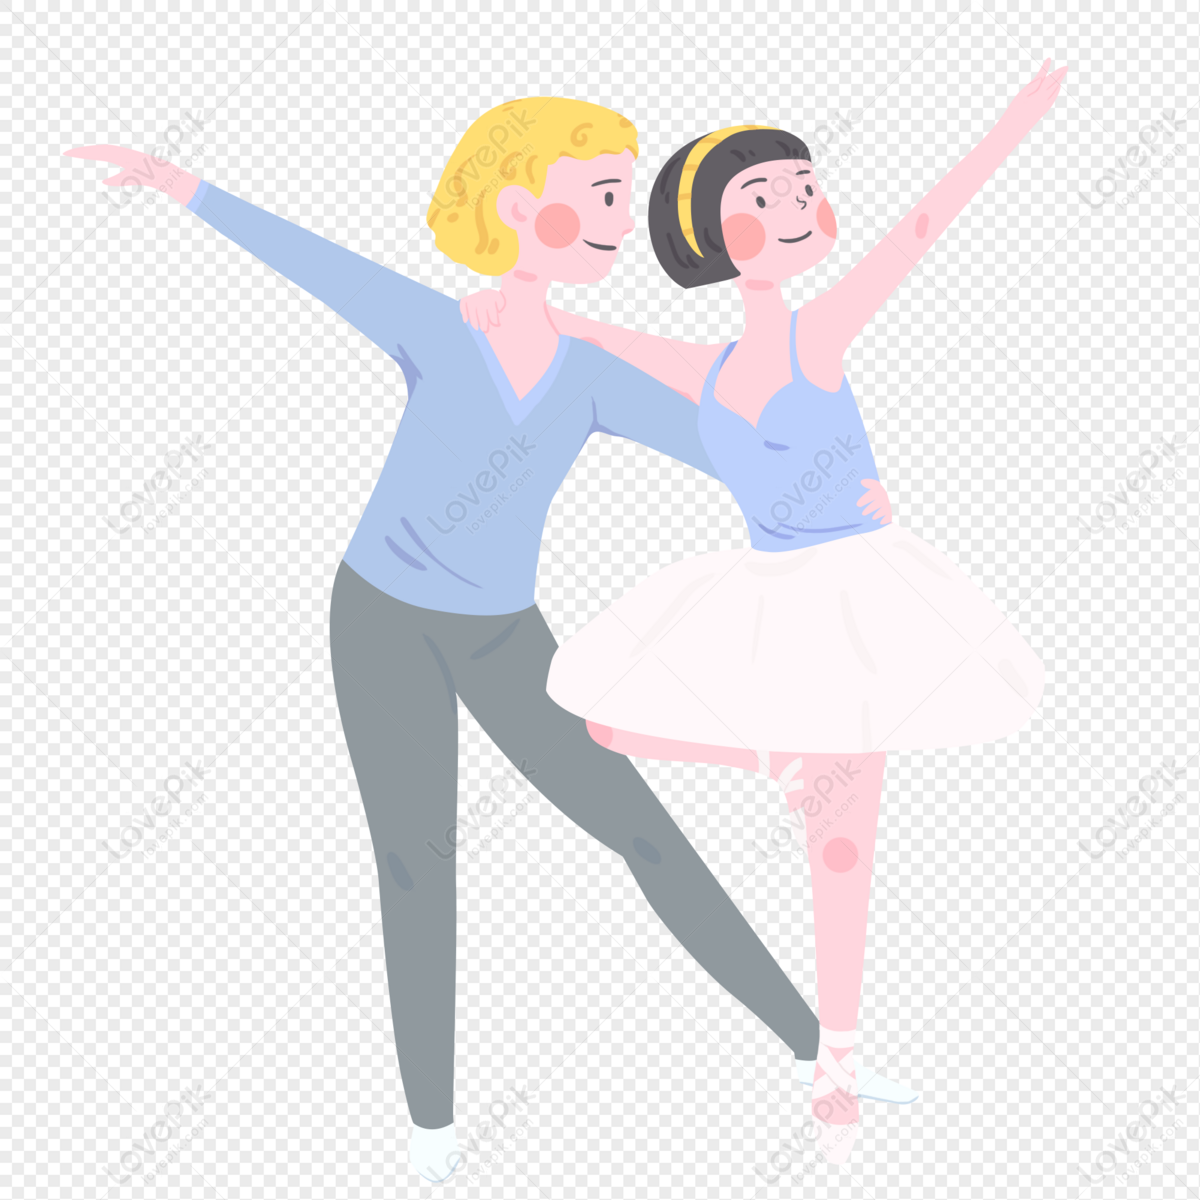 Hand Drawn Cartoon Ballet Couple Dance PNG Transparent And Clipart Image  For Free Download - Lovepik | 401444356